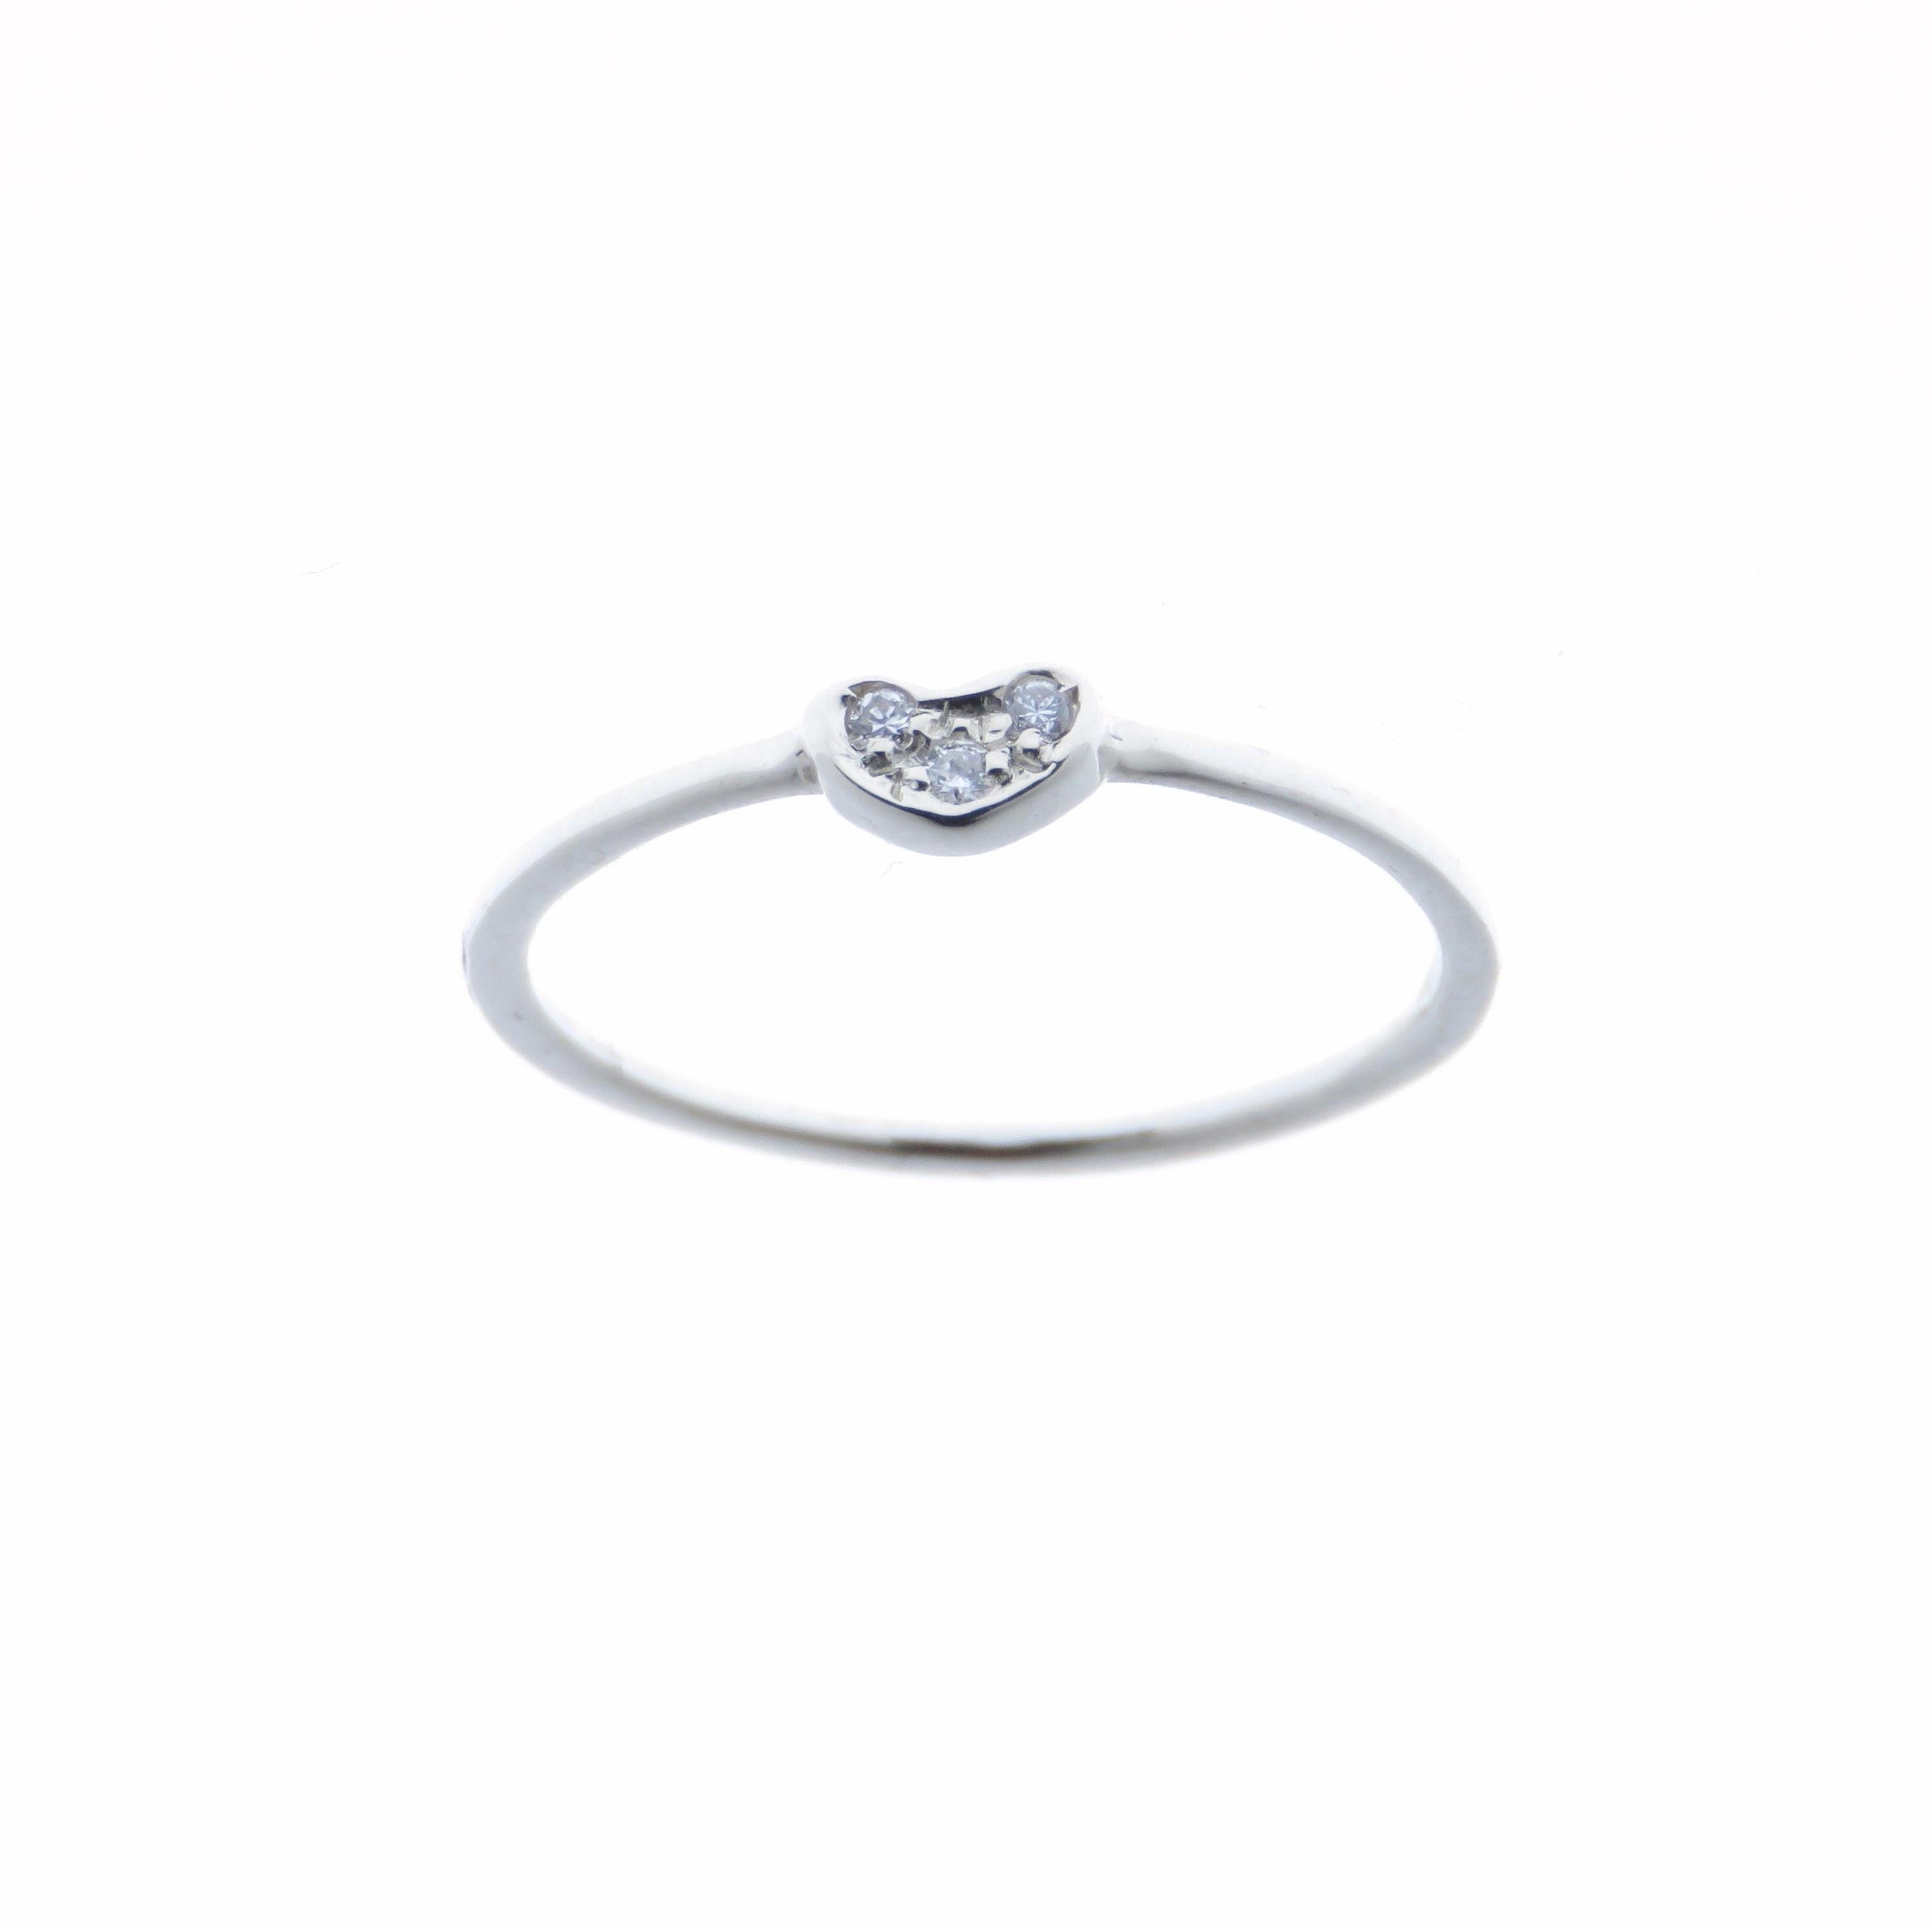 Modern Diamonds White Gold Stacking Ring Handcrafted in Italy by Botta Gioielli For Sale